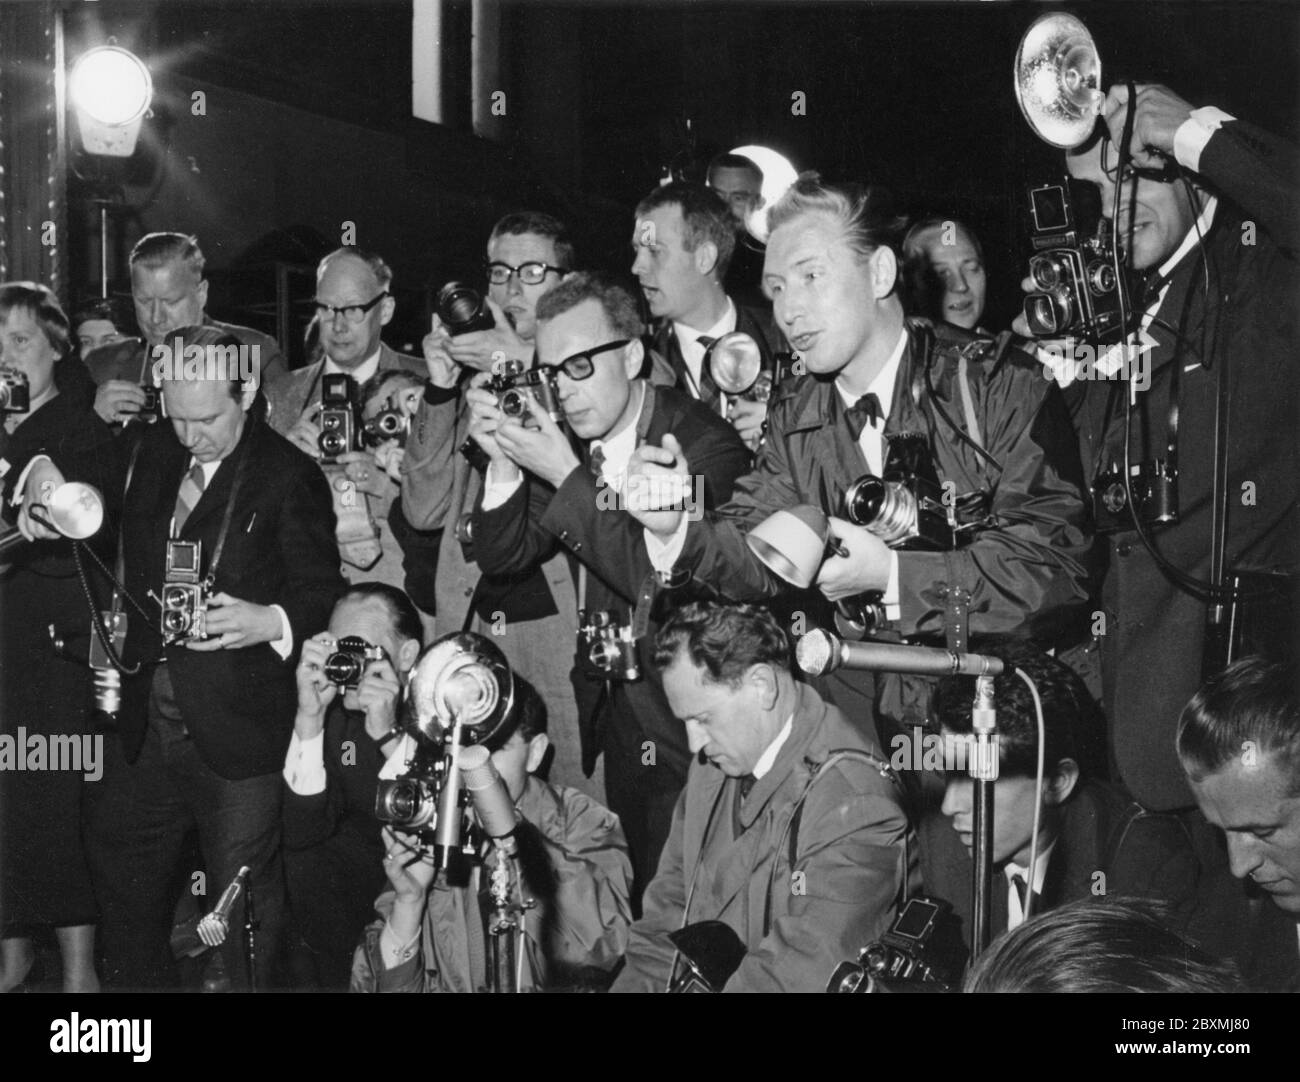 Press photographers. Media is very interested in covering the wedding  of Princess Birgitta of Sweden with prince Johann Georg of Hohenzollern-Sigmaringen in Sigmaringens church may 30 1961. The pressphotographers at the event are all trying to get good pictures of the couple. Many different cameras are visible, Rolleiflex, Hasselblad, Leica. Stock Photo